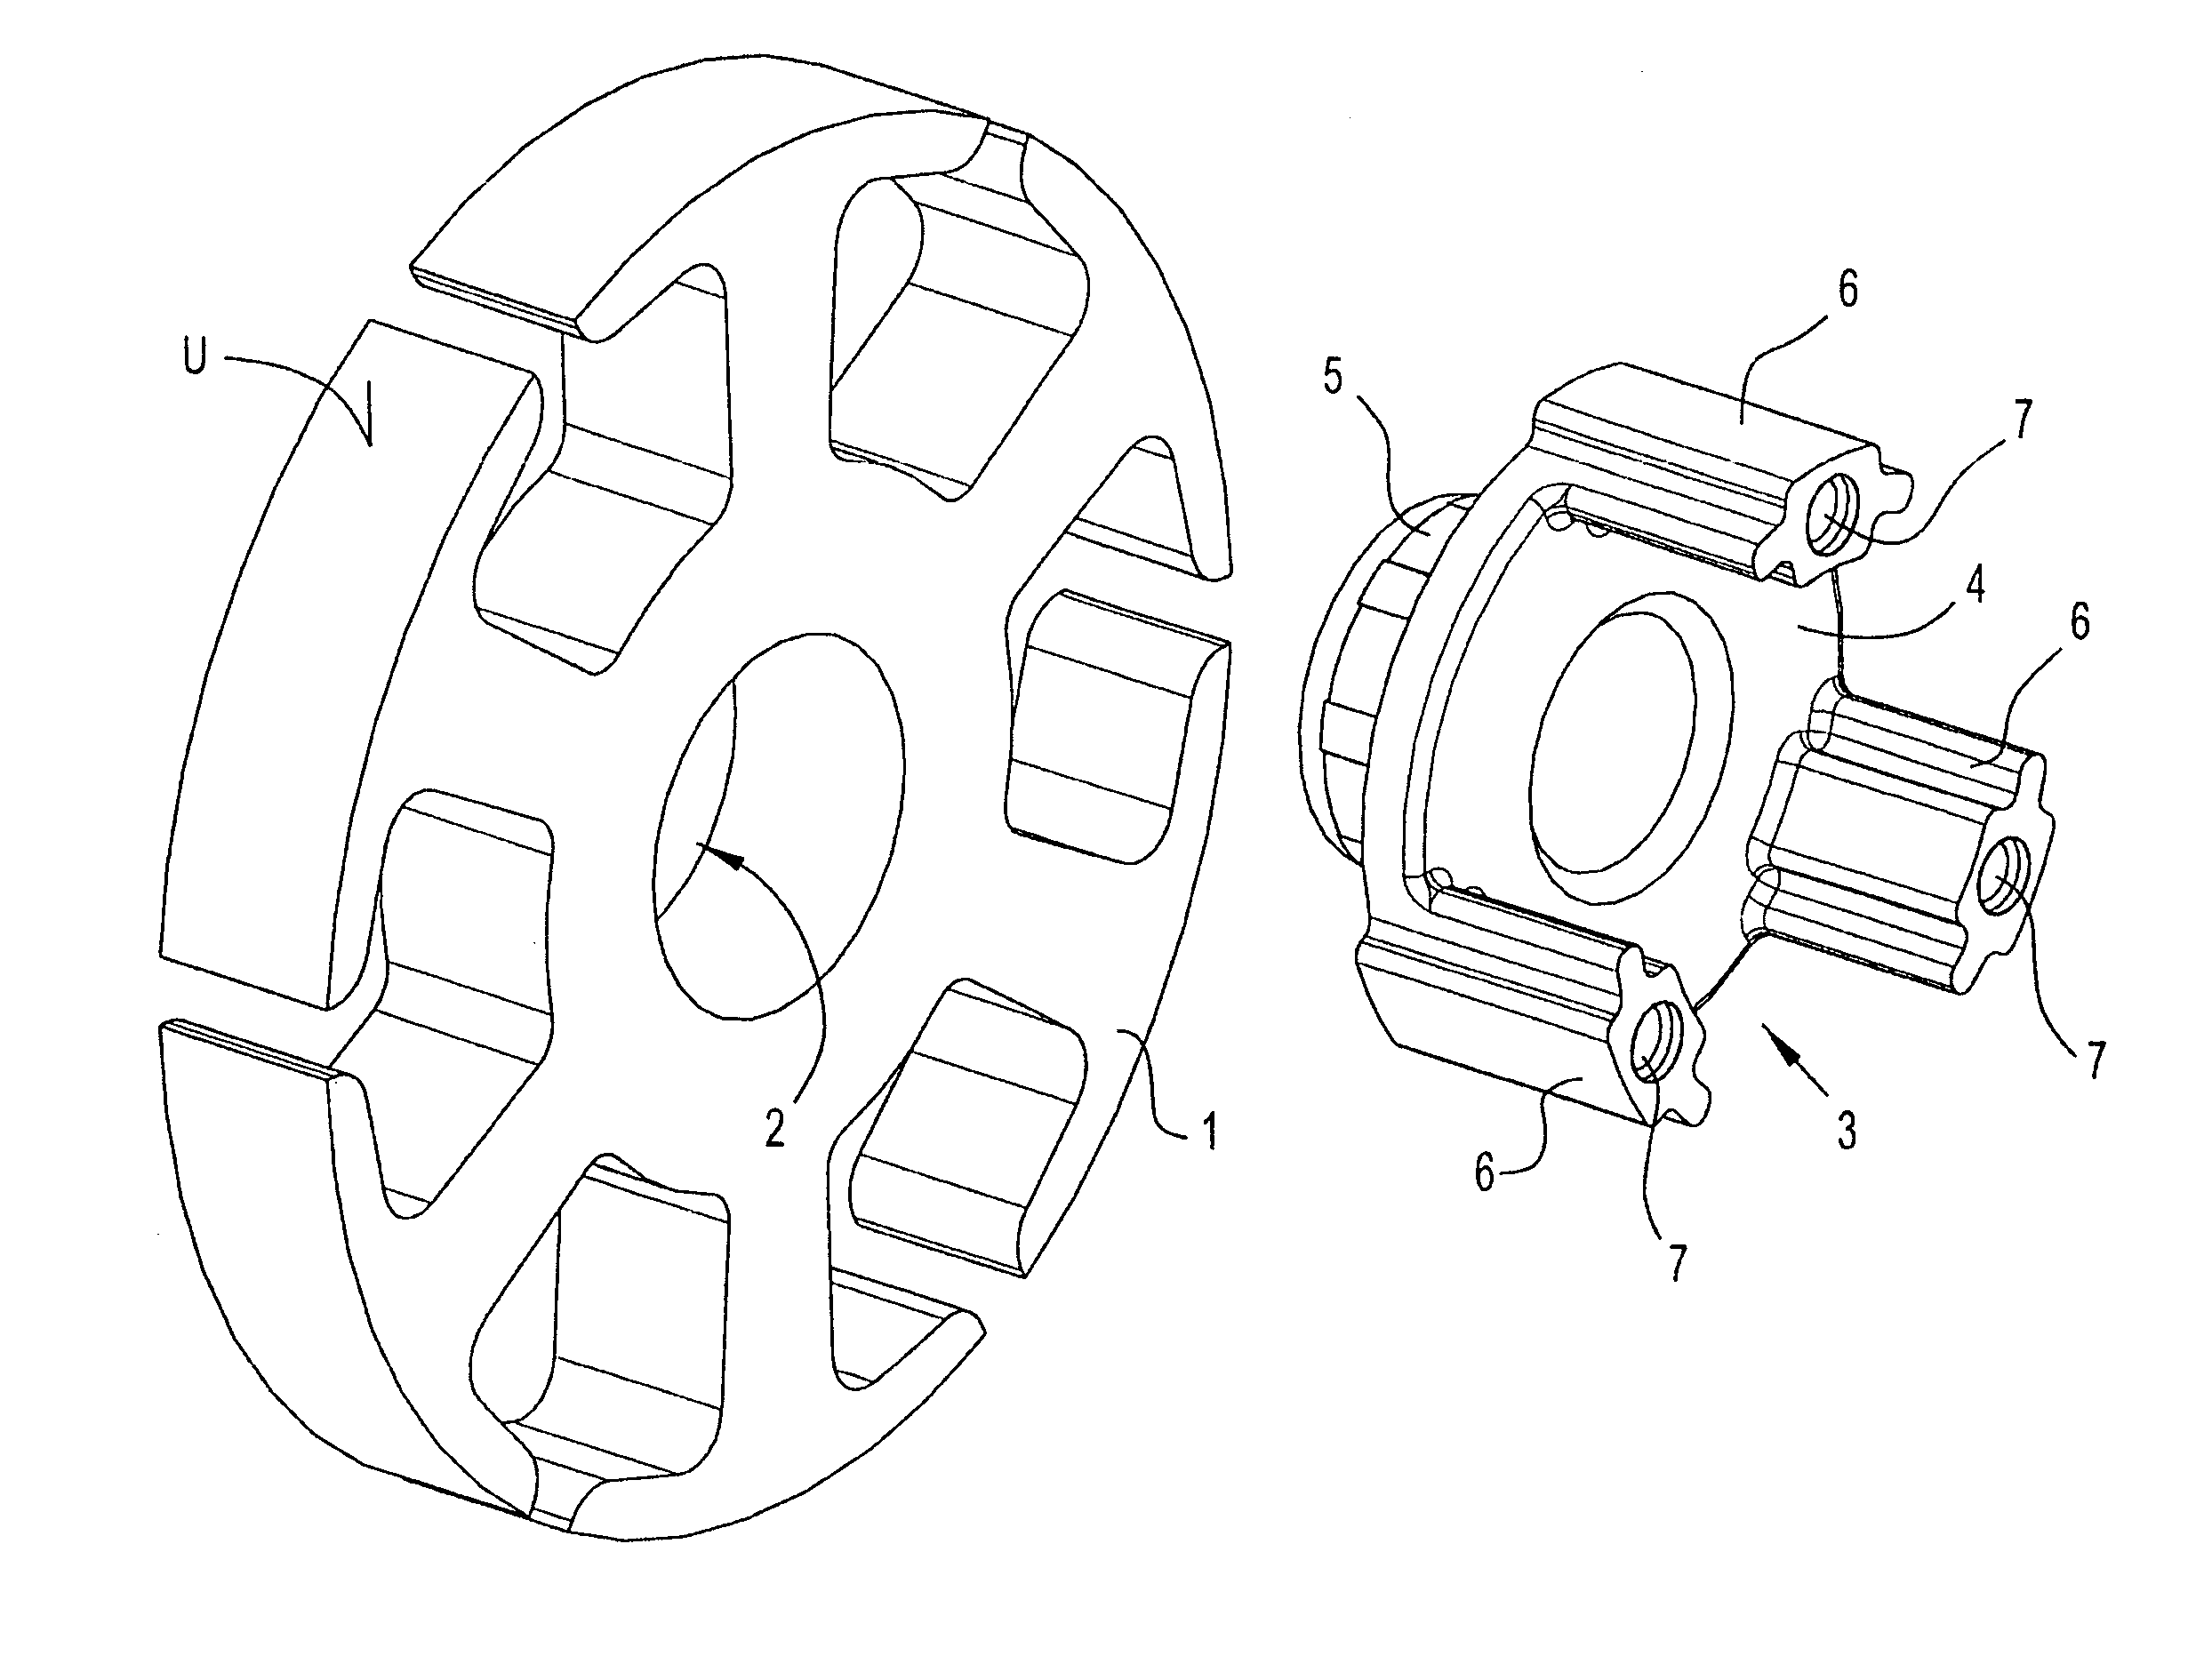 Stator of an electric motor